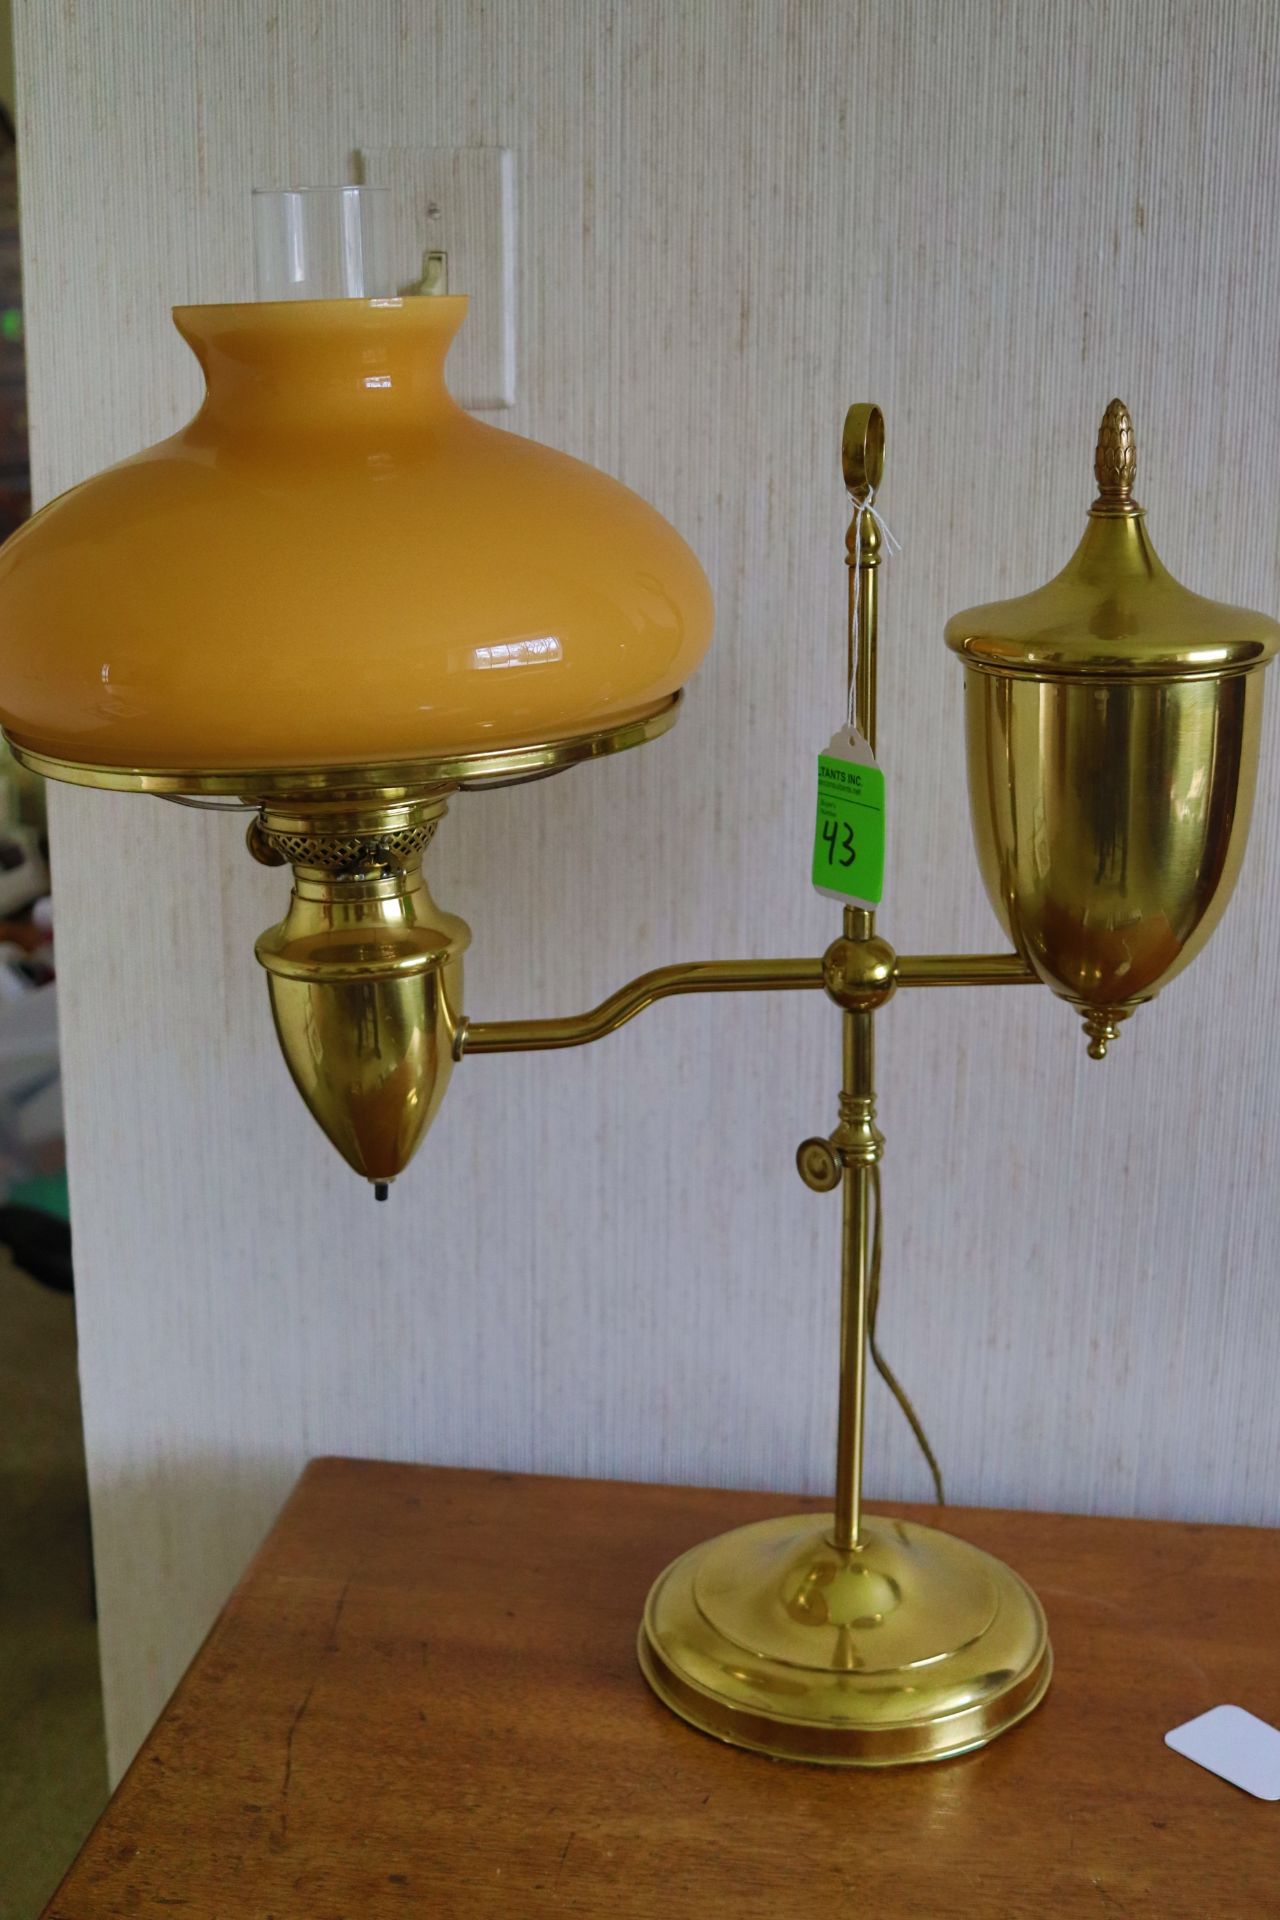 brass candle design table lamp fitted with a beige shade, approximate height 24"